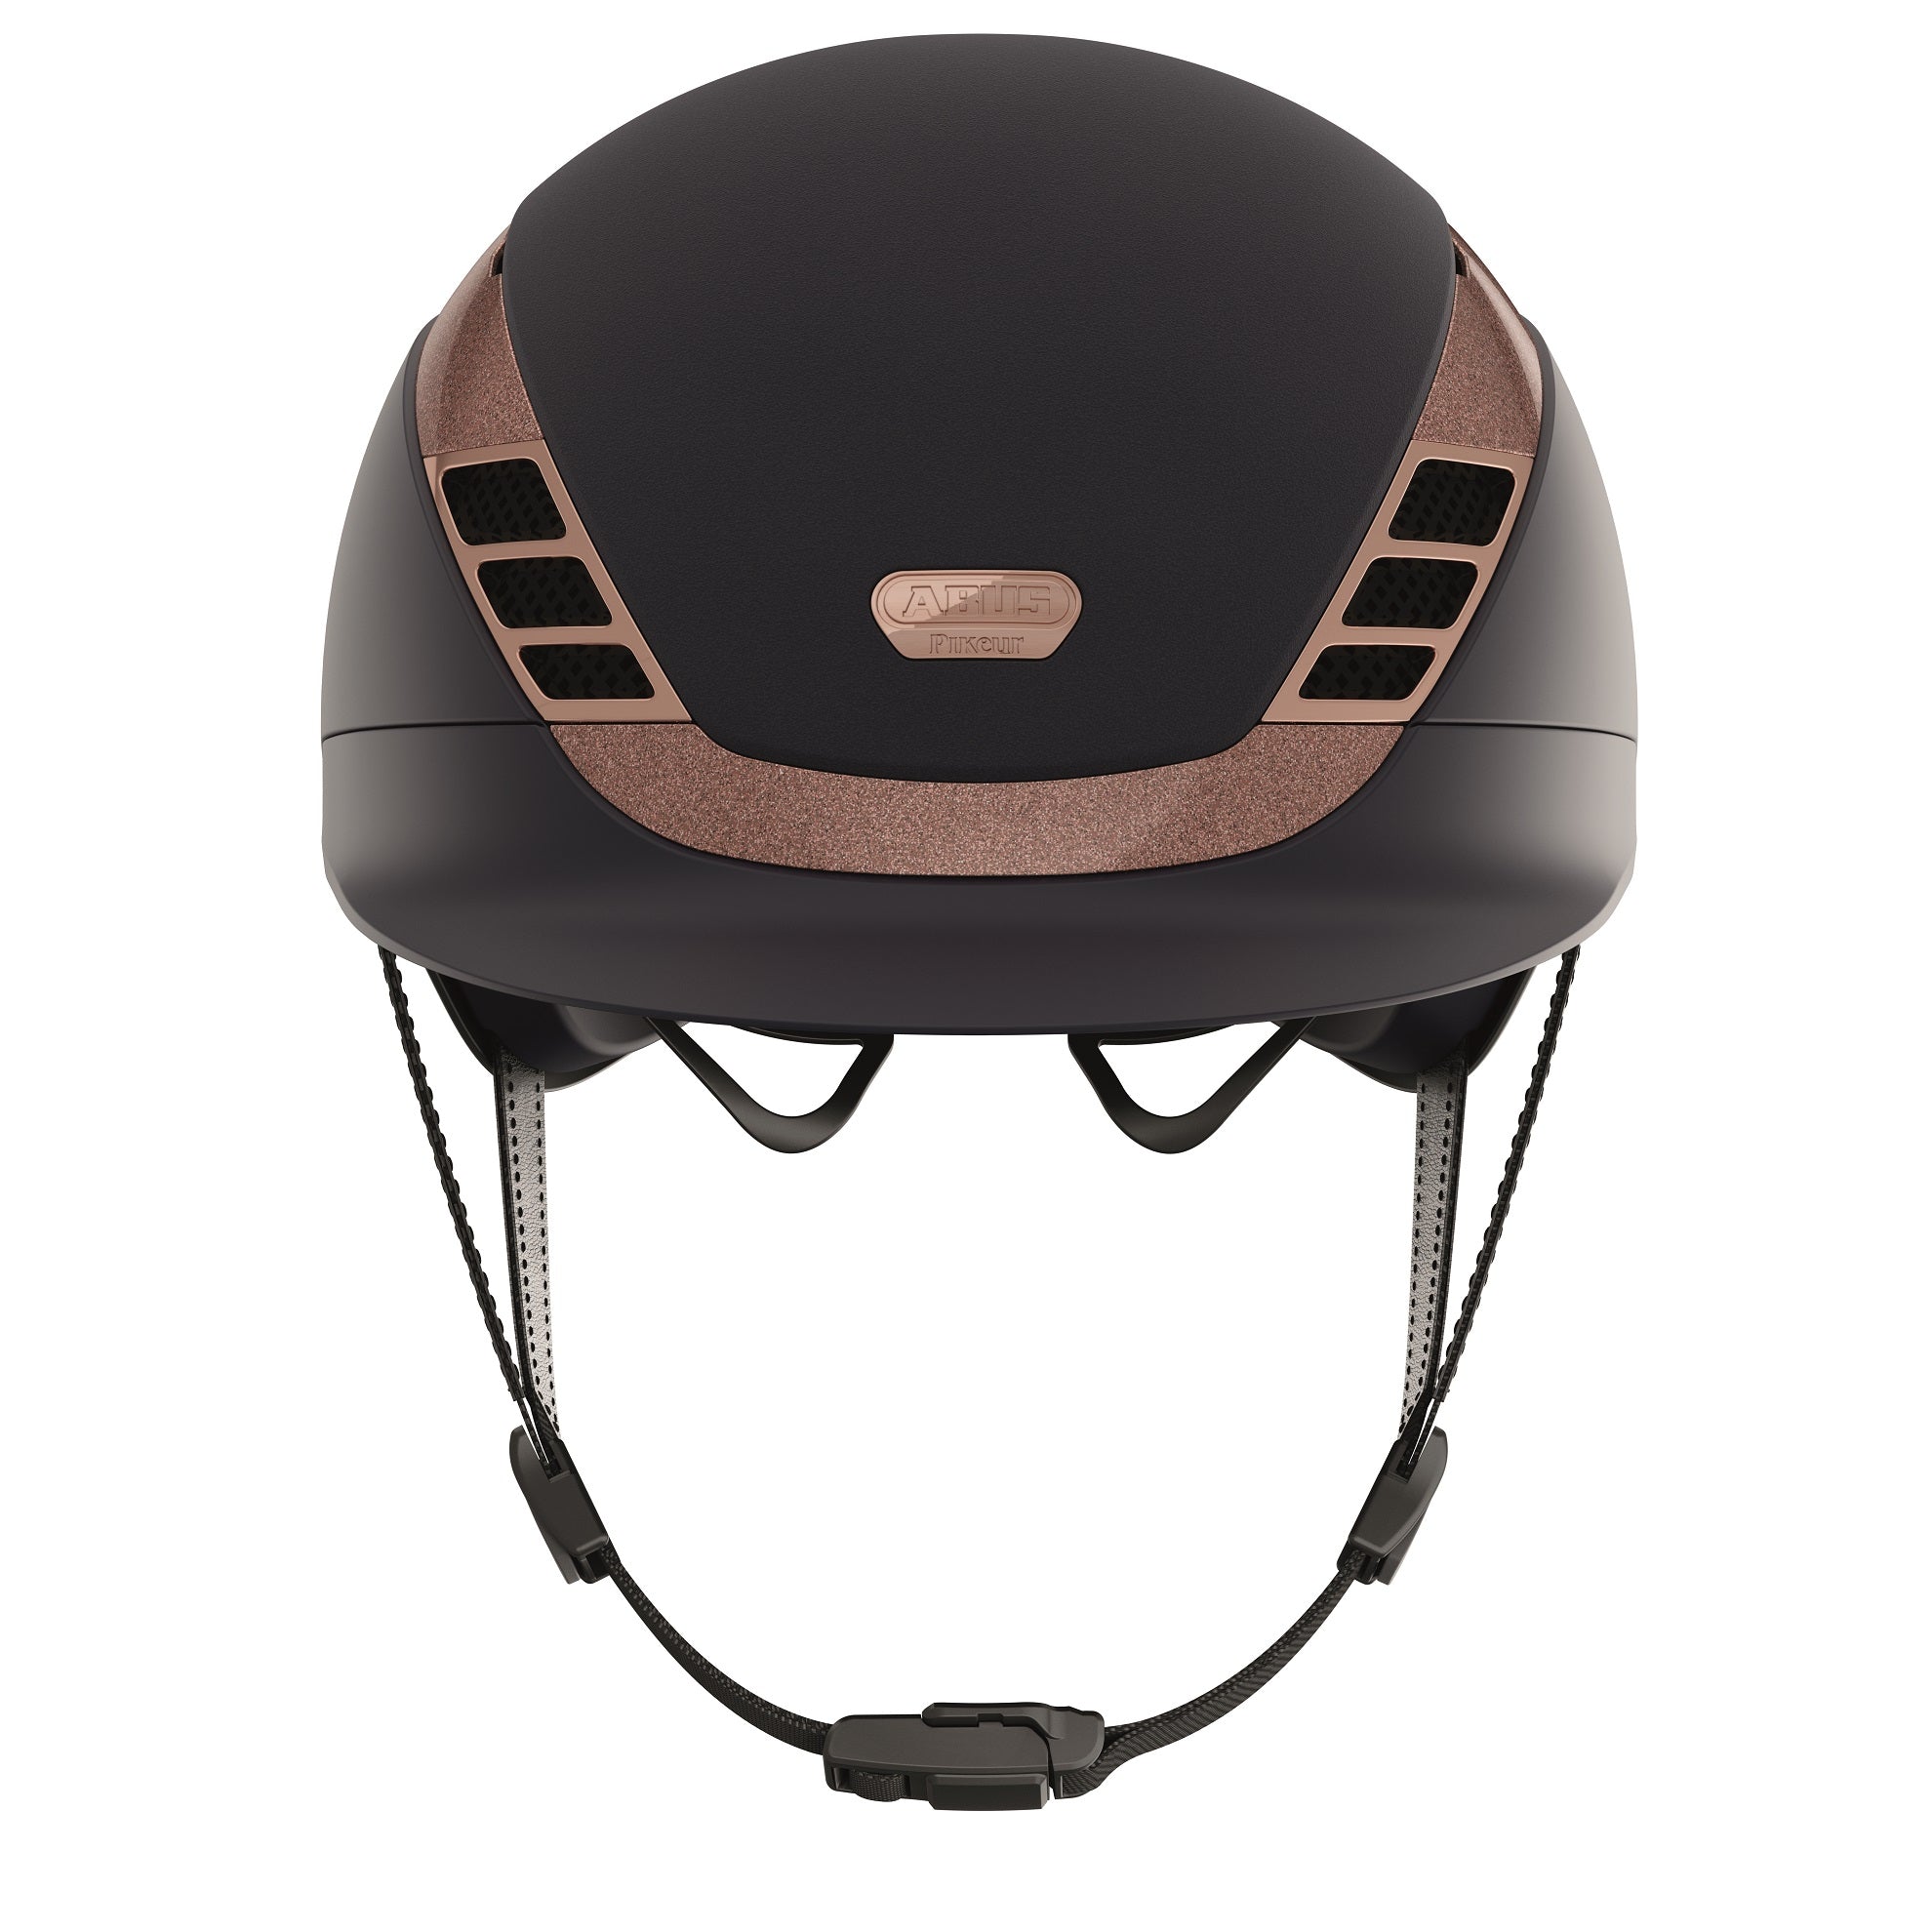 Abus AirLuxe Supreme Riding Helmet - Youth Size - due October